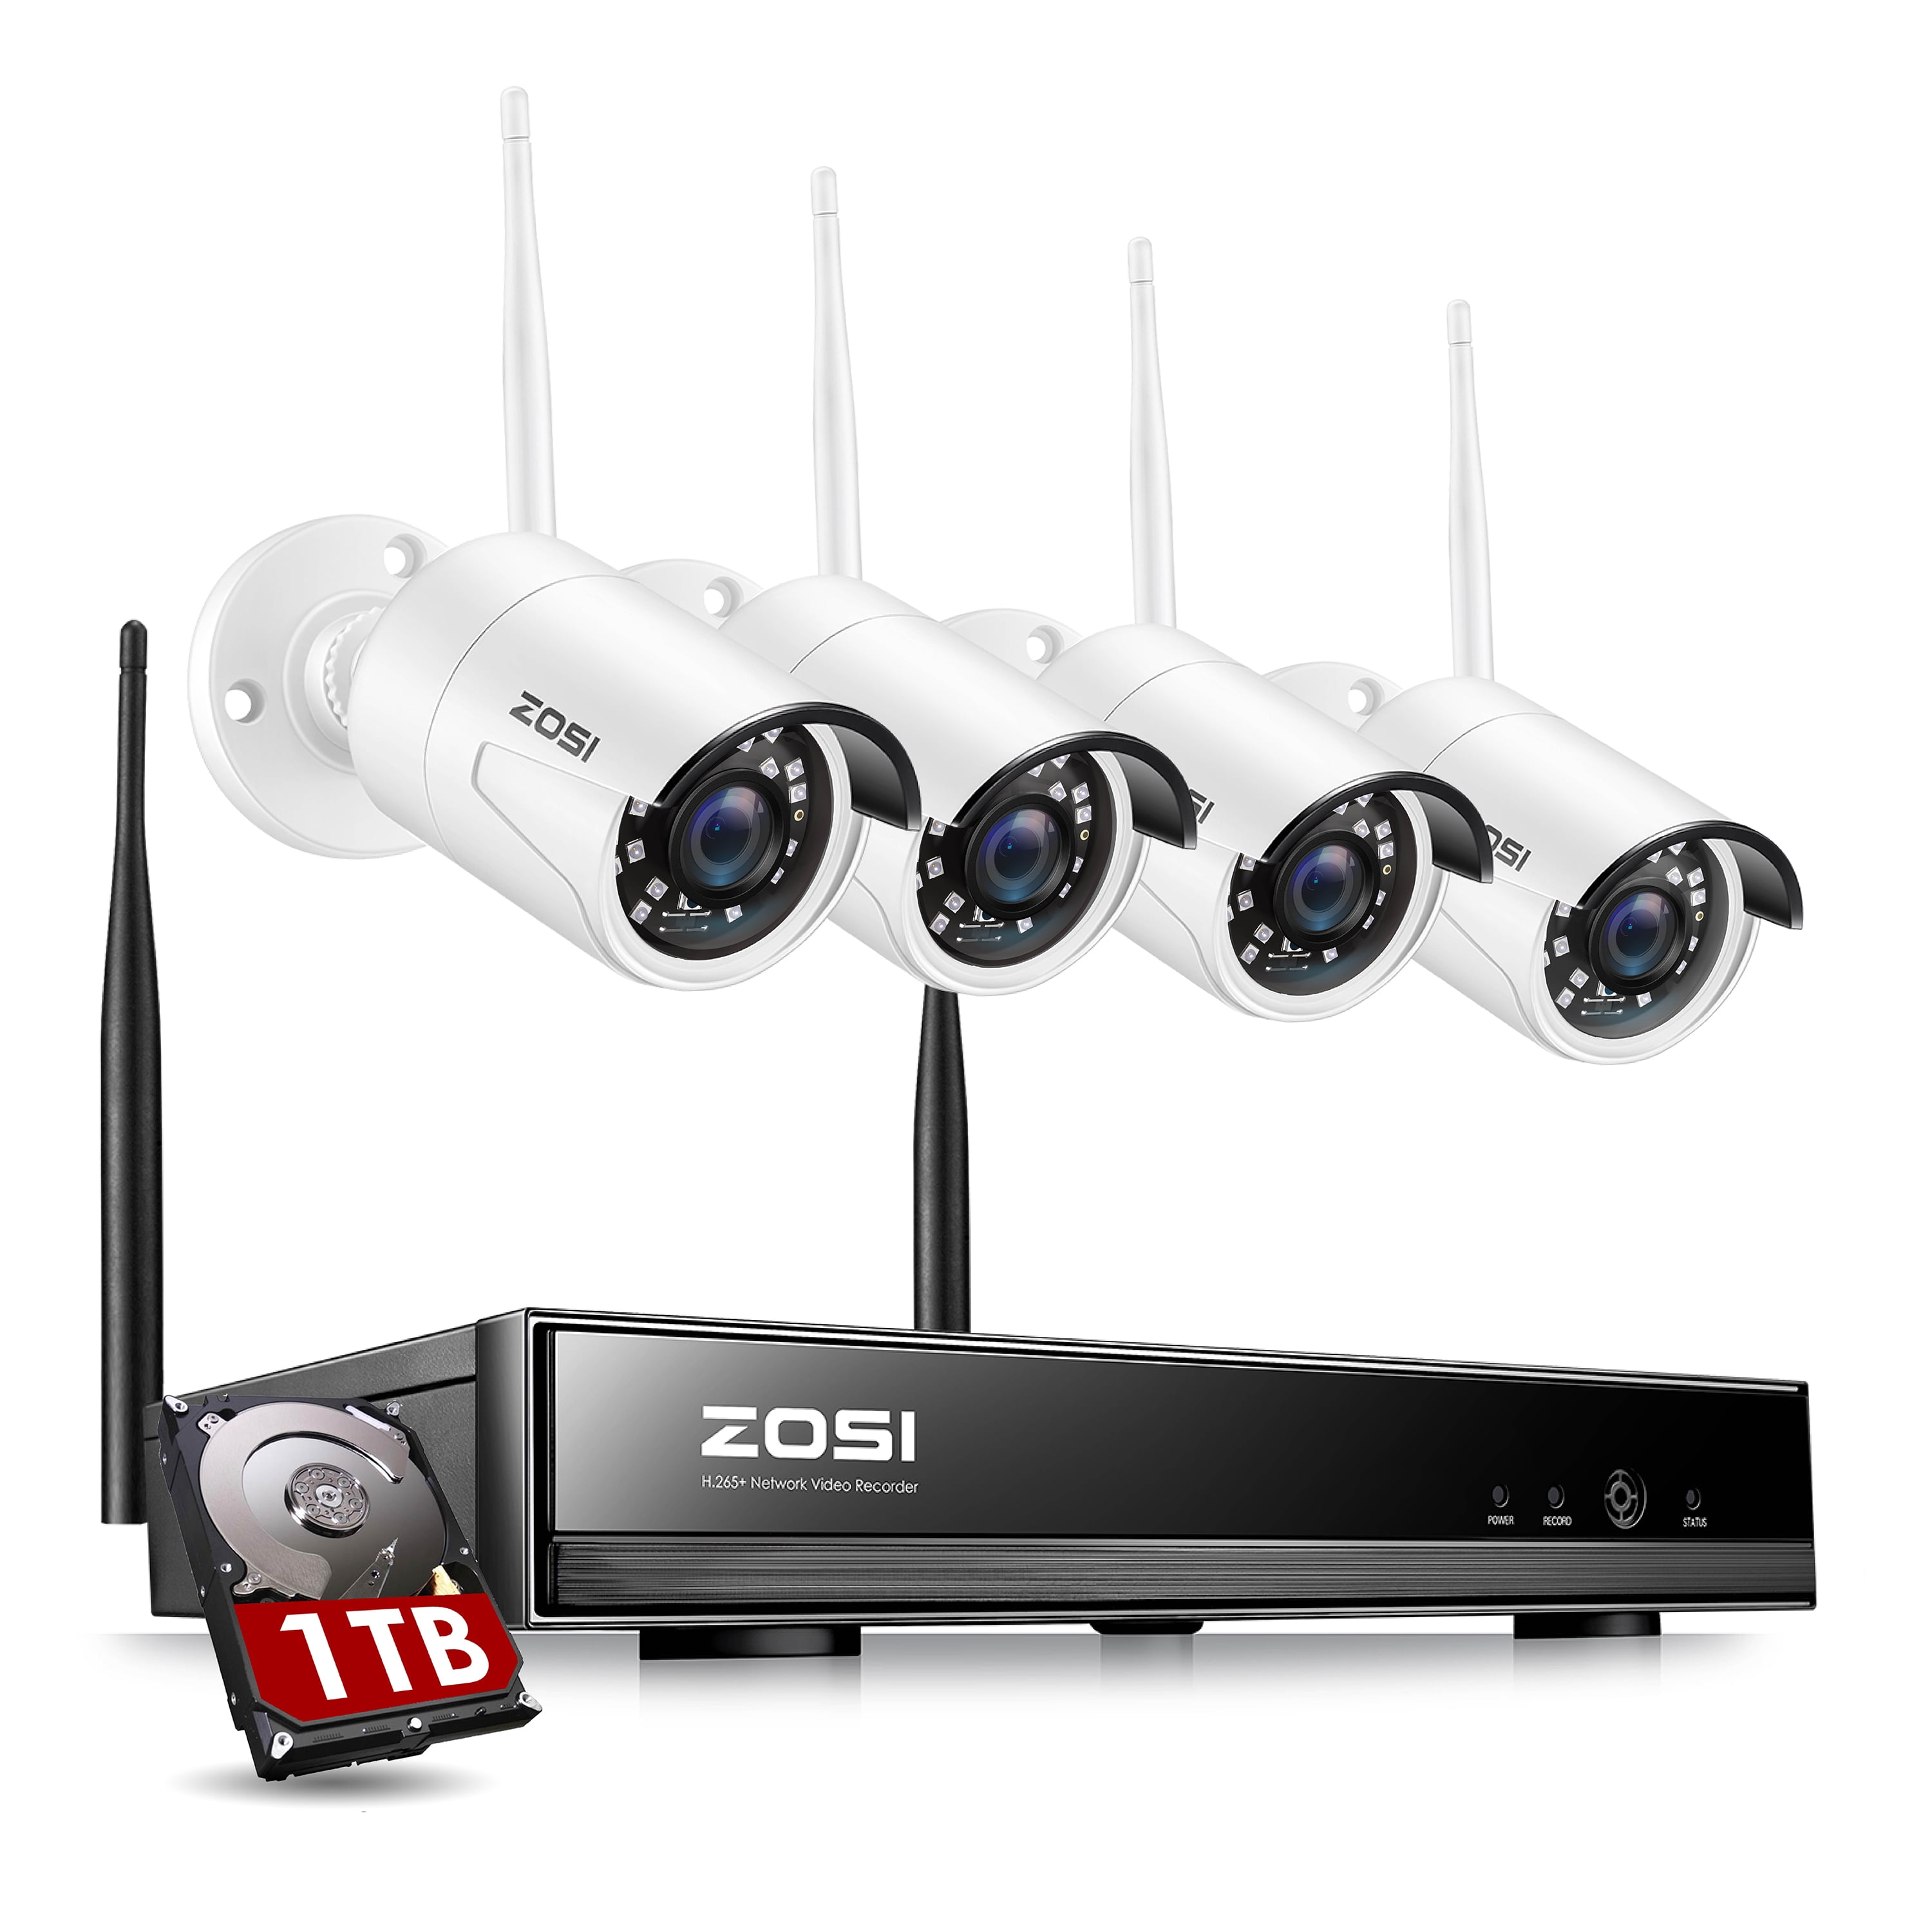 8CH CCTV NVR with 1TB Hard Drive,6pcs 1080P 2MP Outdoor Surveillance WiFi Cameras,Color Night Vision,Light &Siren Alarm ZOSI Spotlight Wireless Security Camera System with Two Way Audio,2K H.265